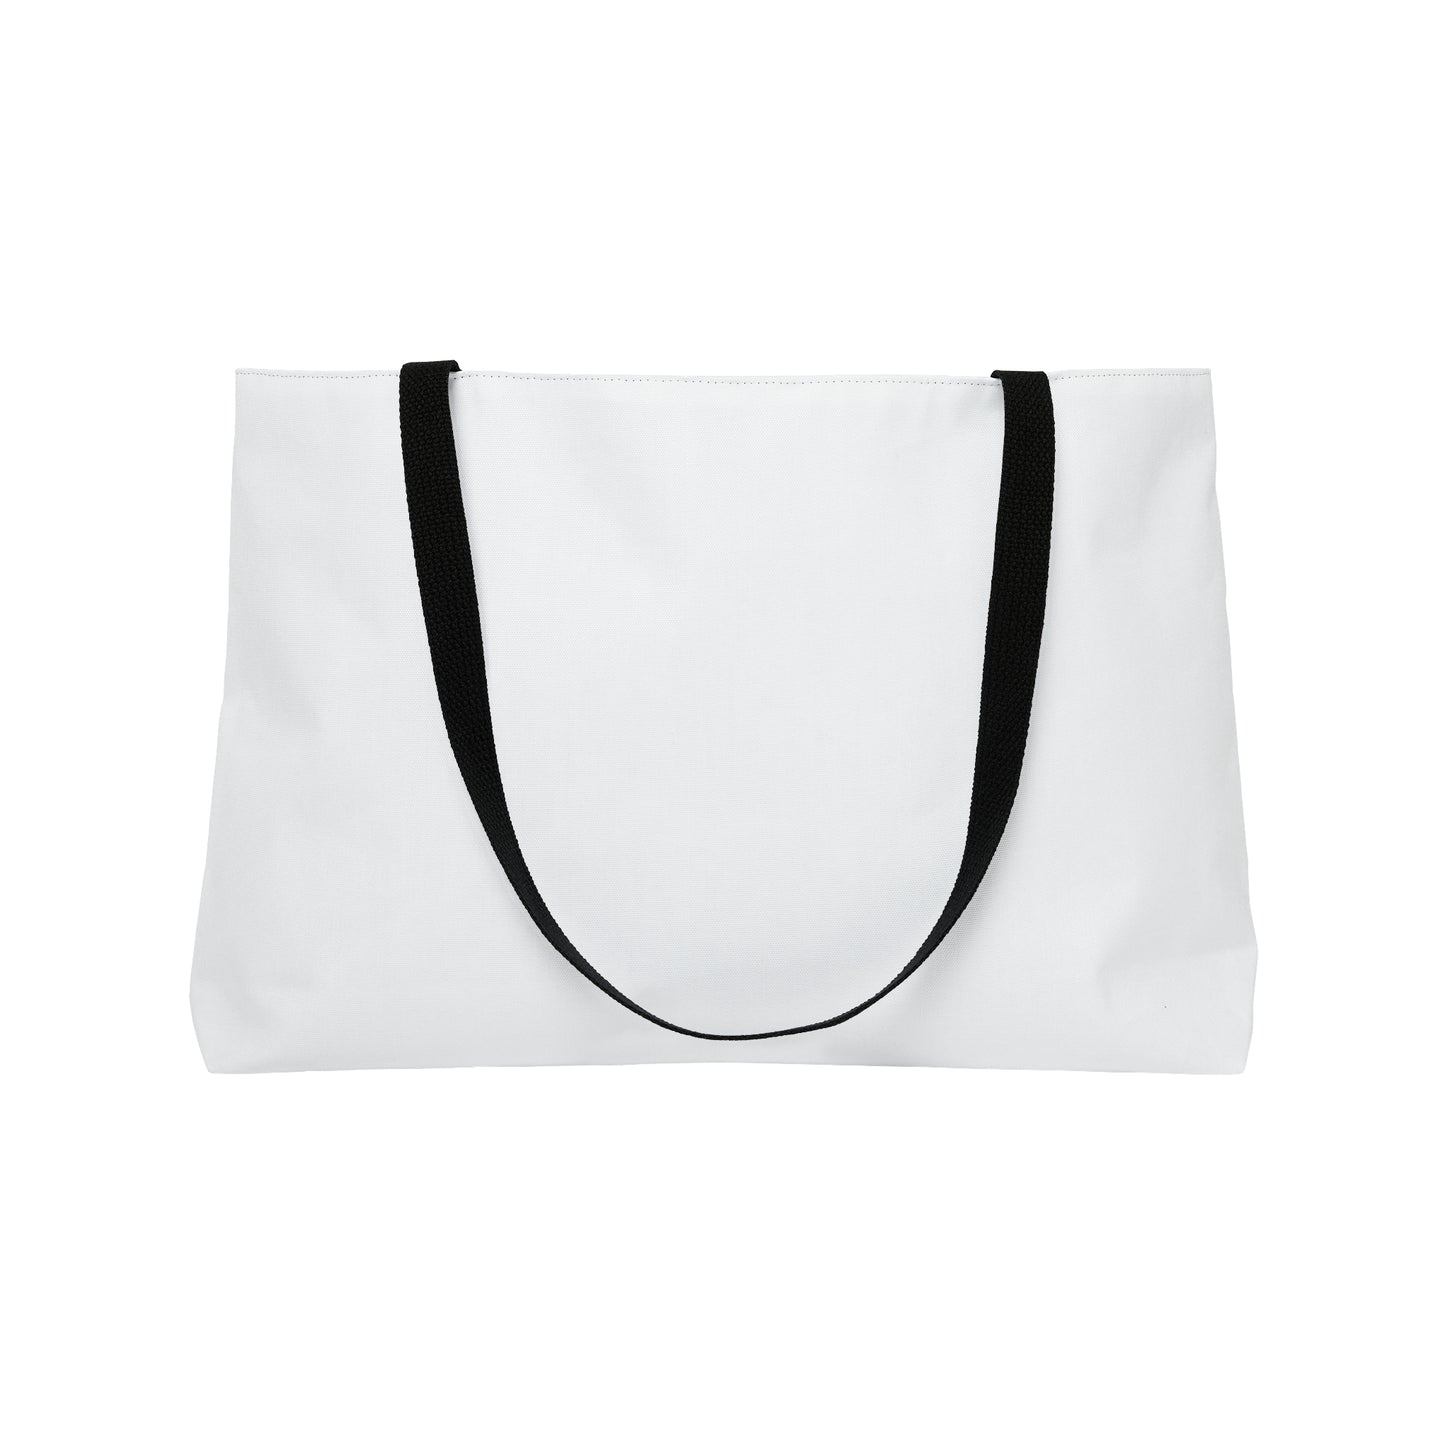 Weekender Tote Bag with Official Logo